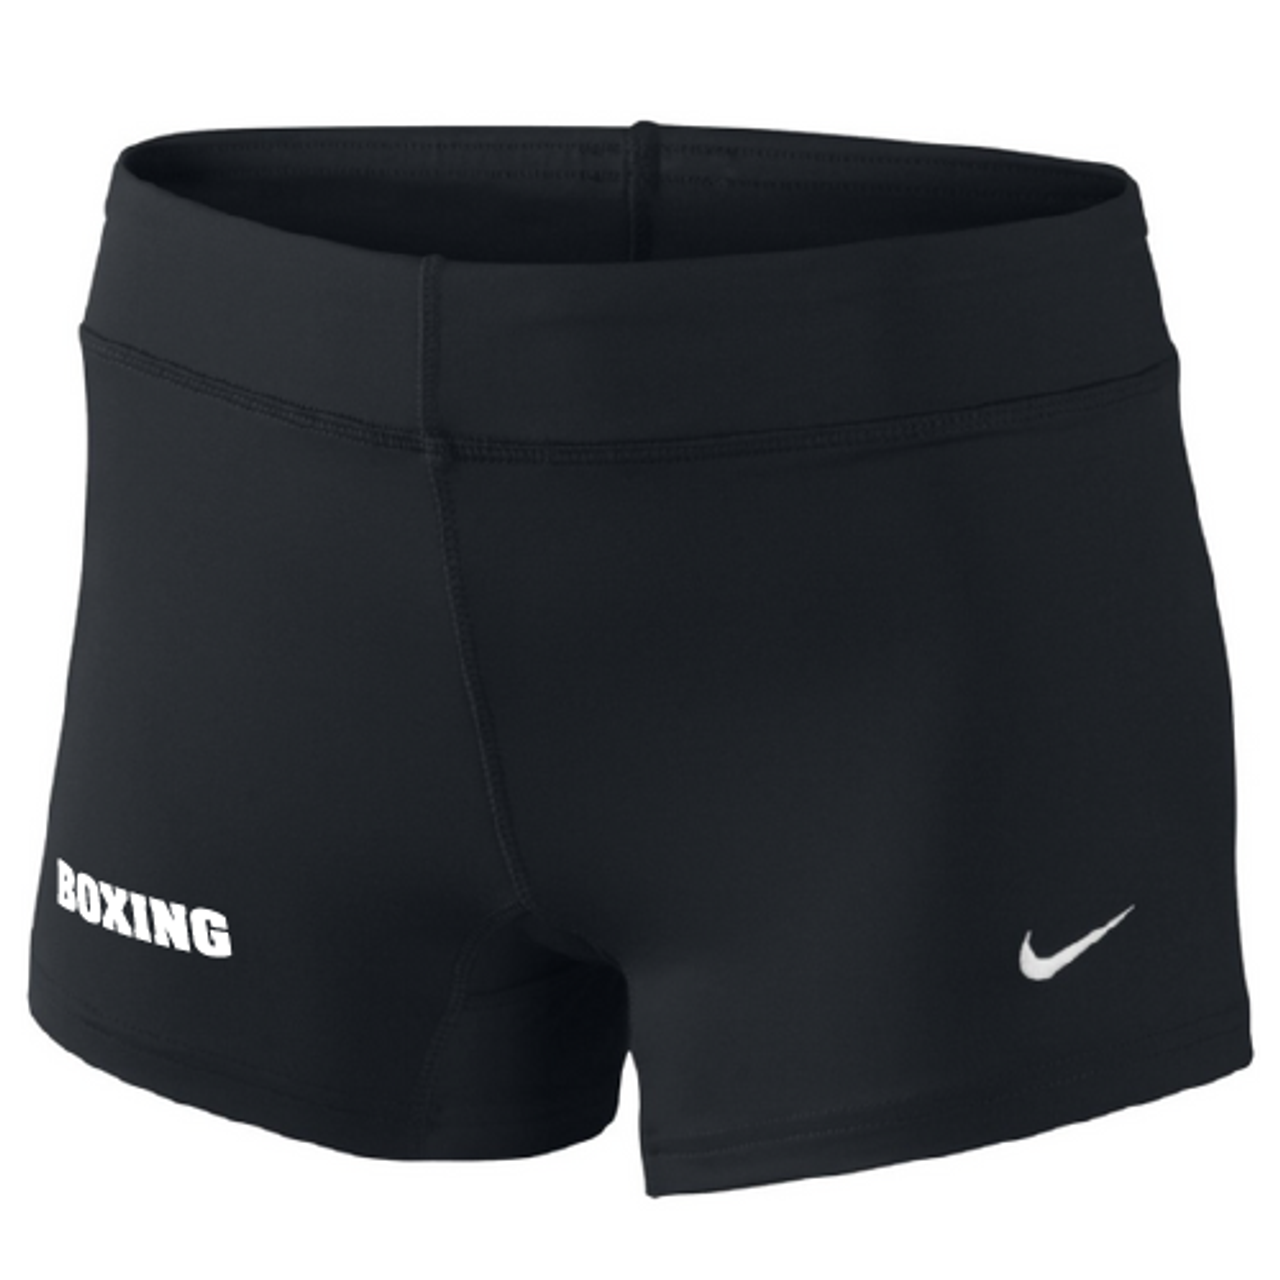 Women's SD Athletic Boxers in Black